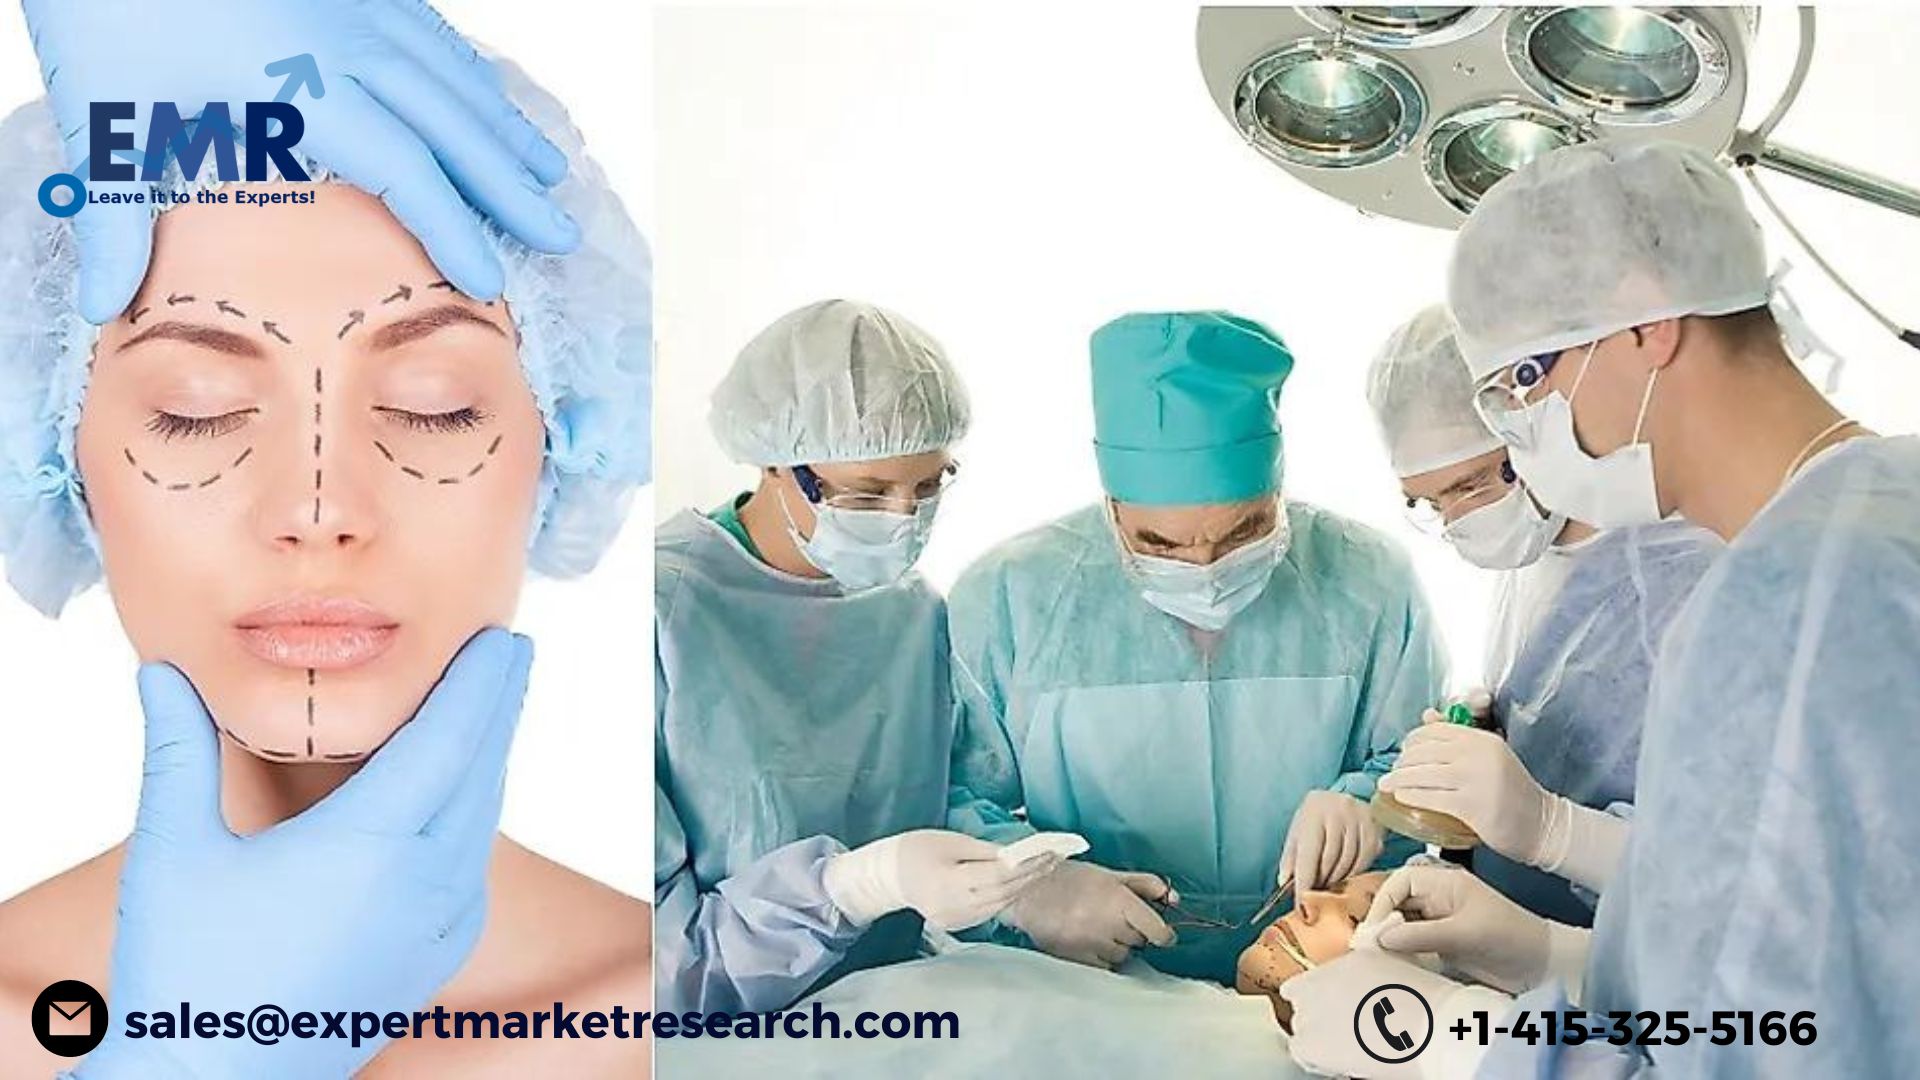 Cosmetic Surgery Market